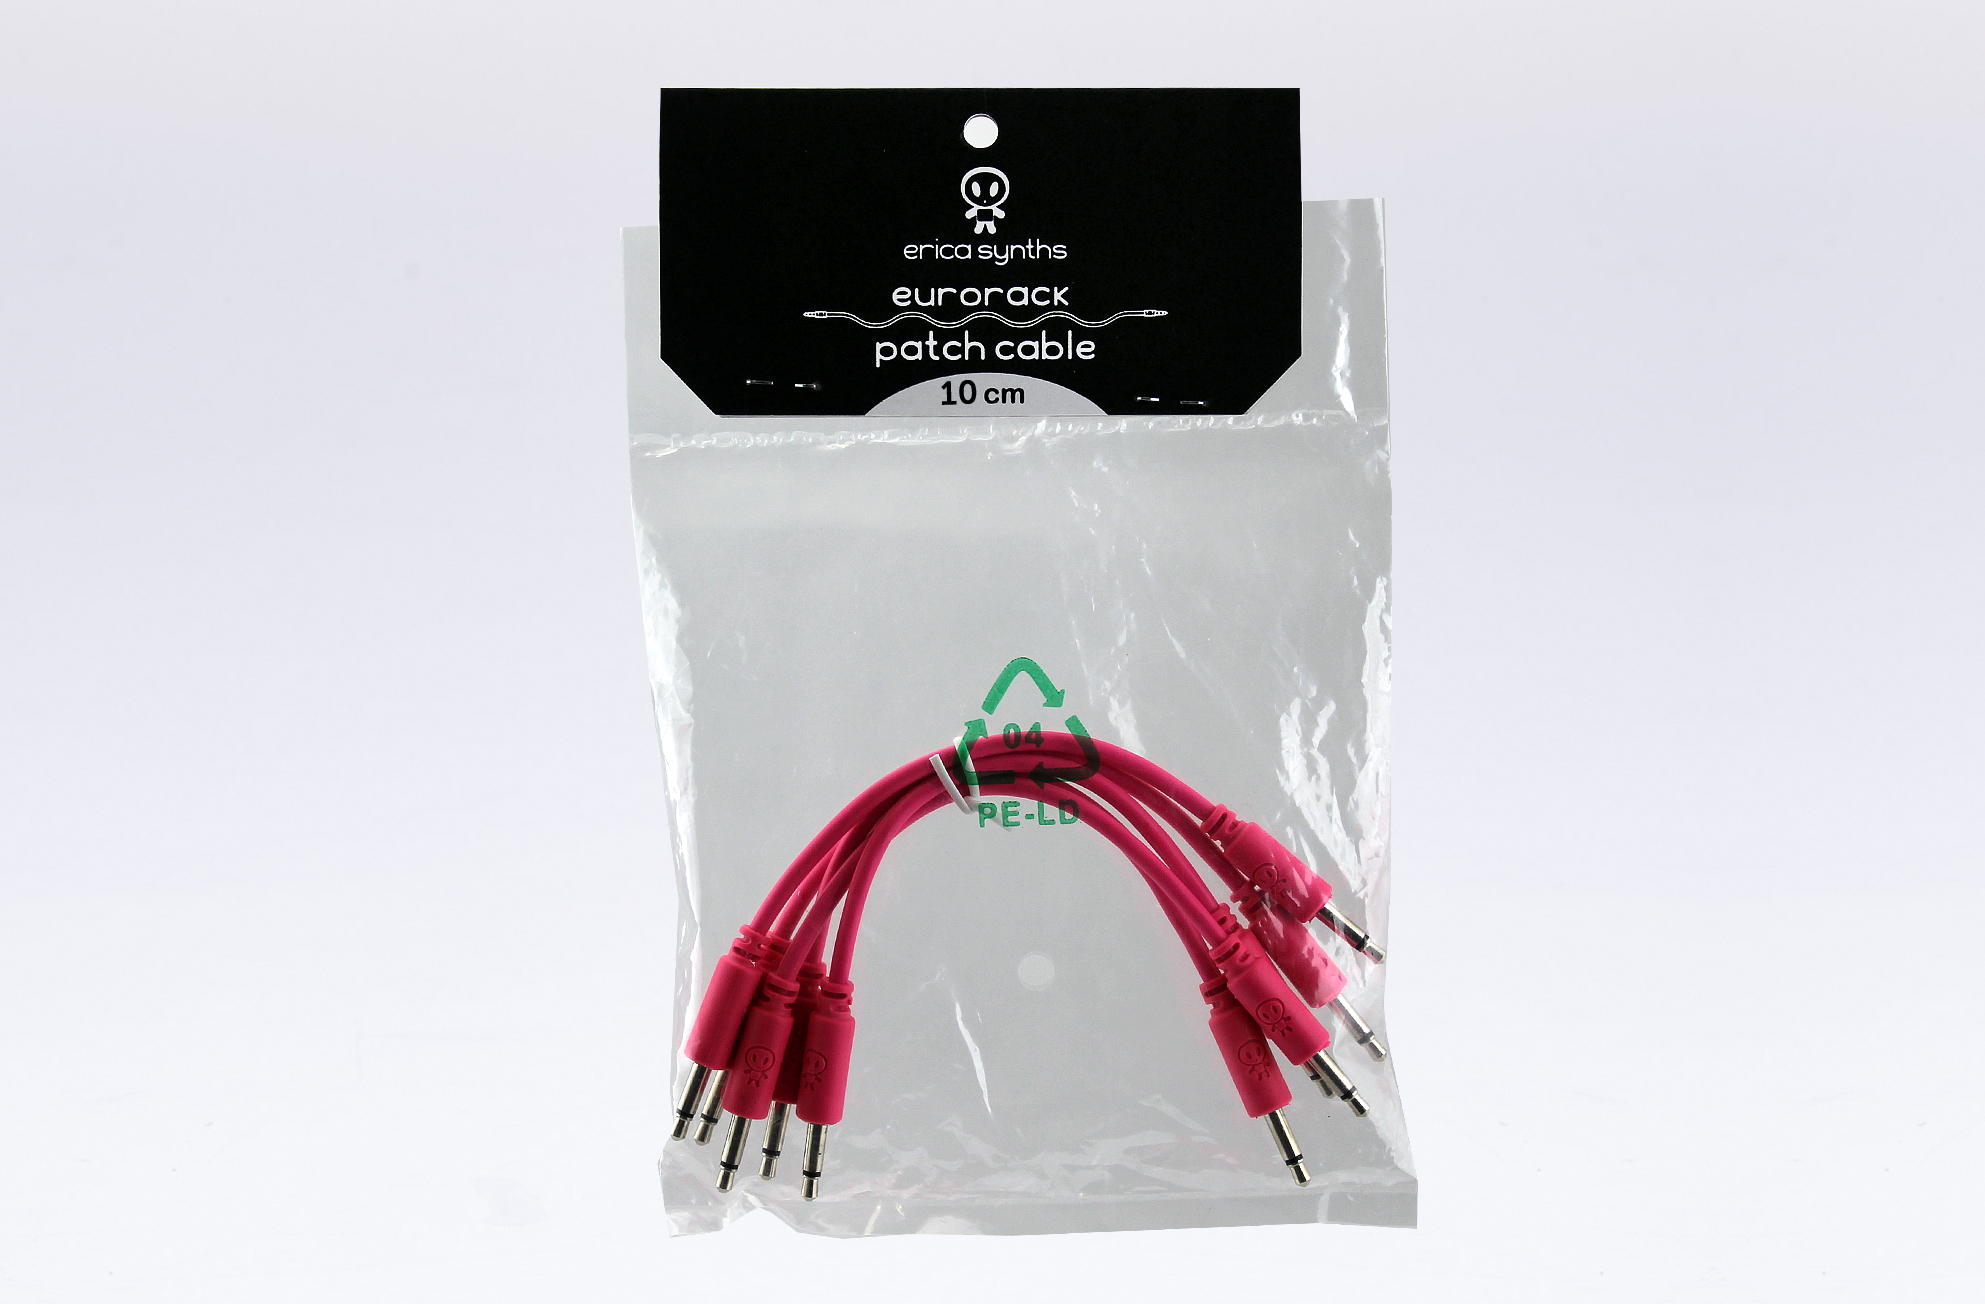 Erica Synths Eurorack Patch Cables 10cm, 5 Pcs Red по цене 740 ₽